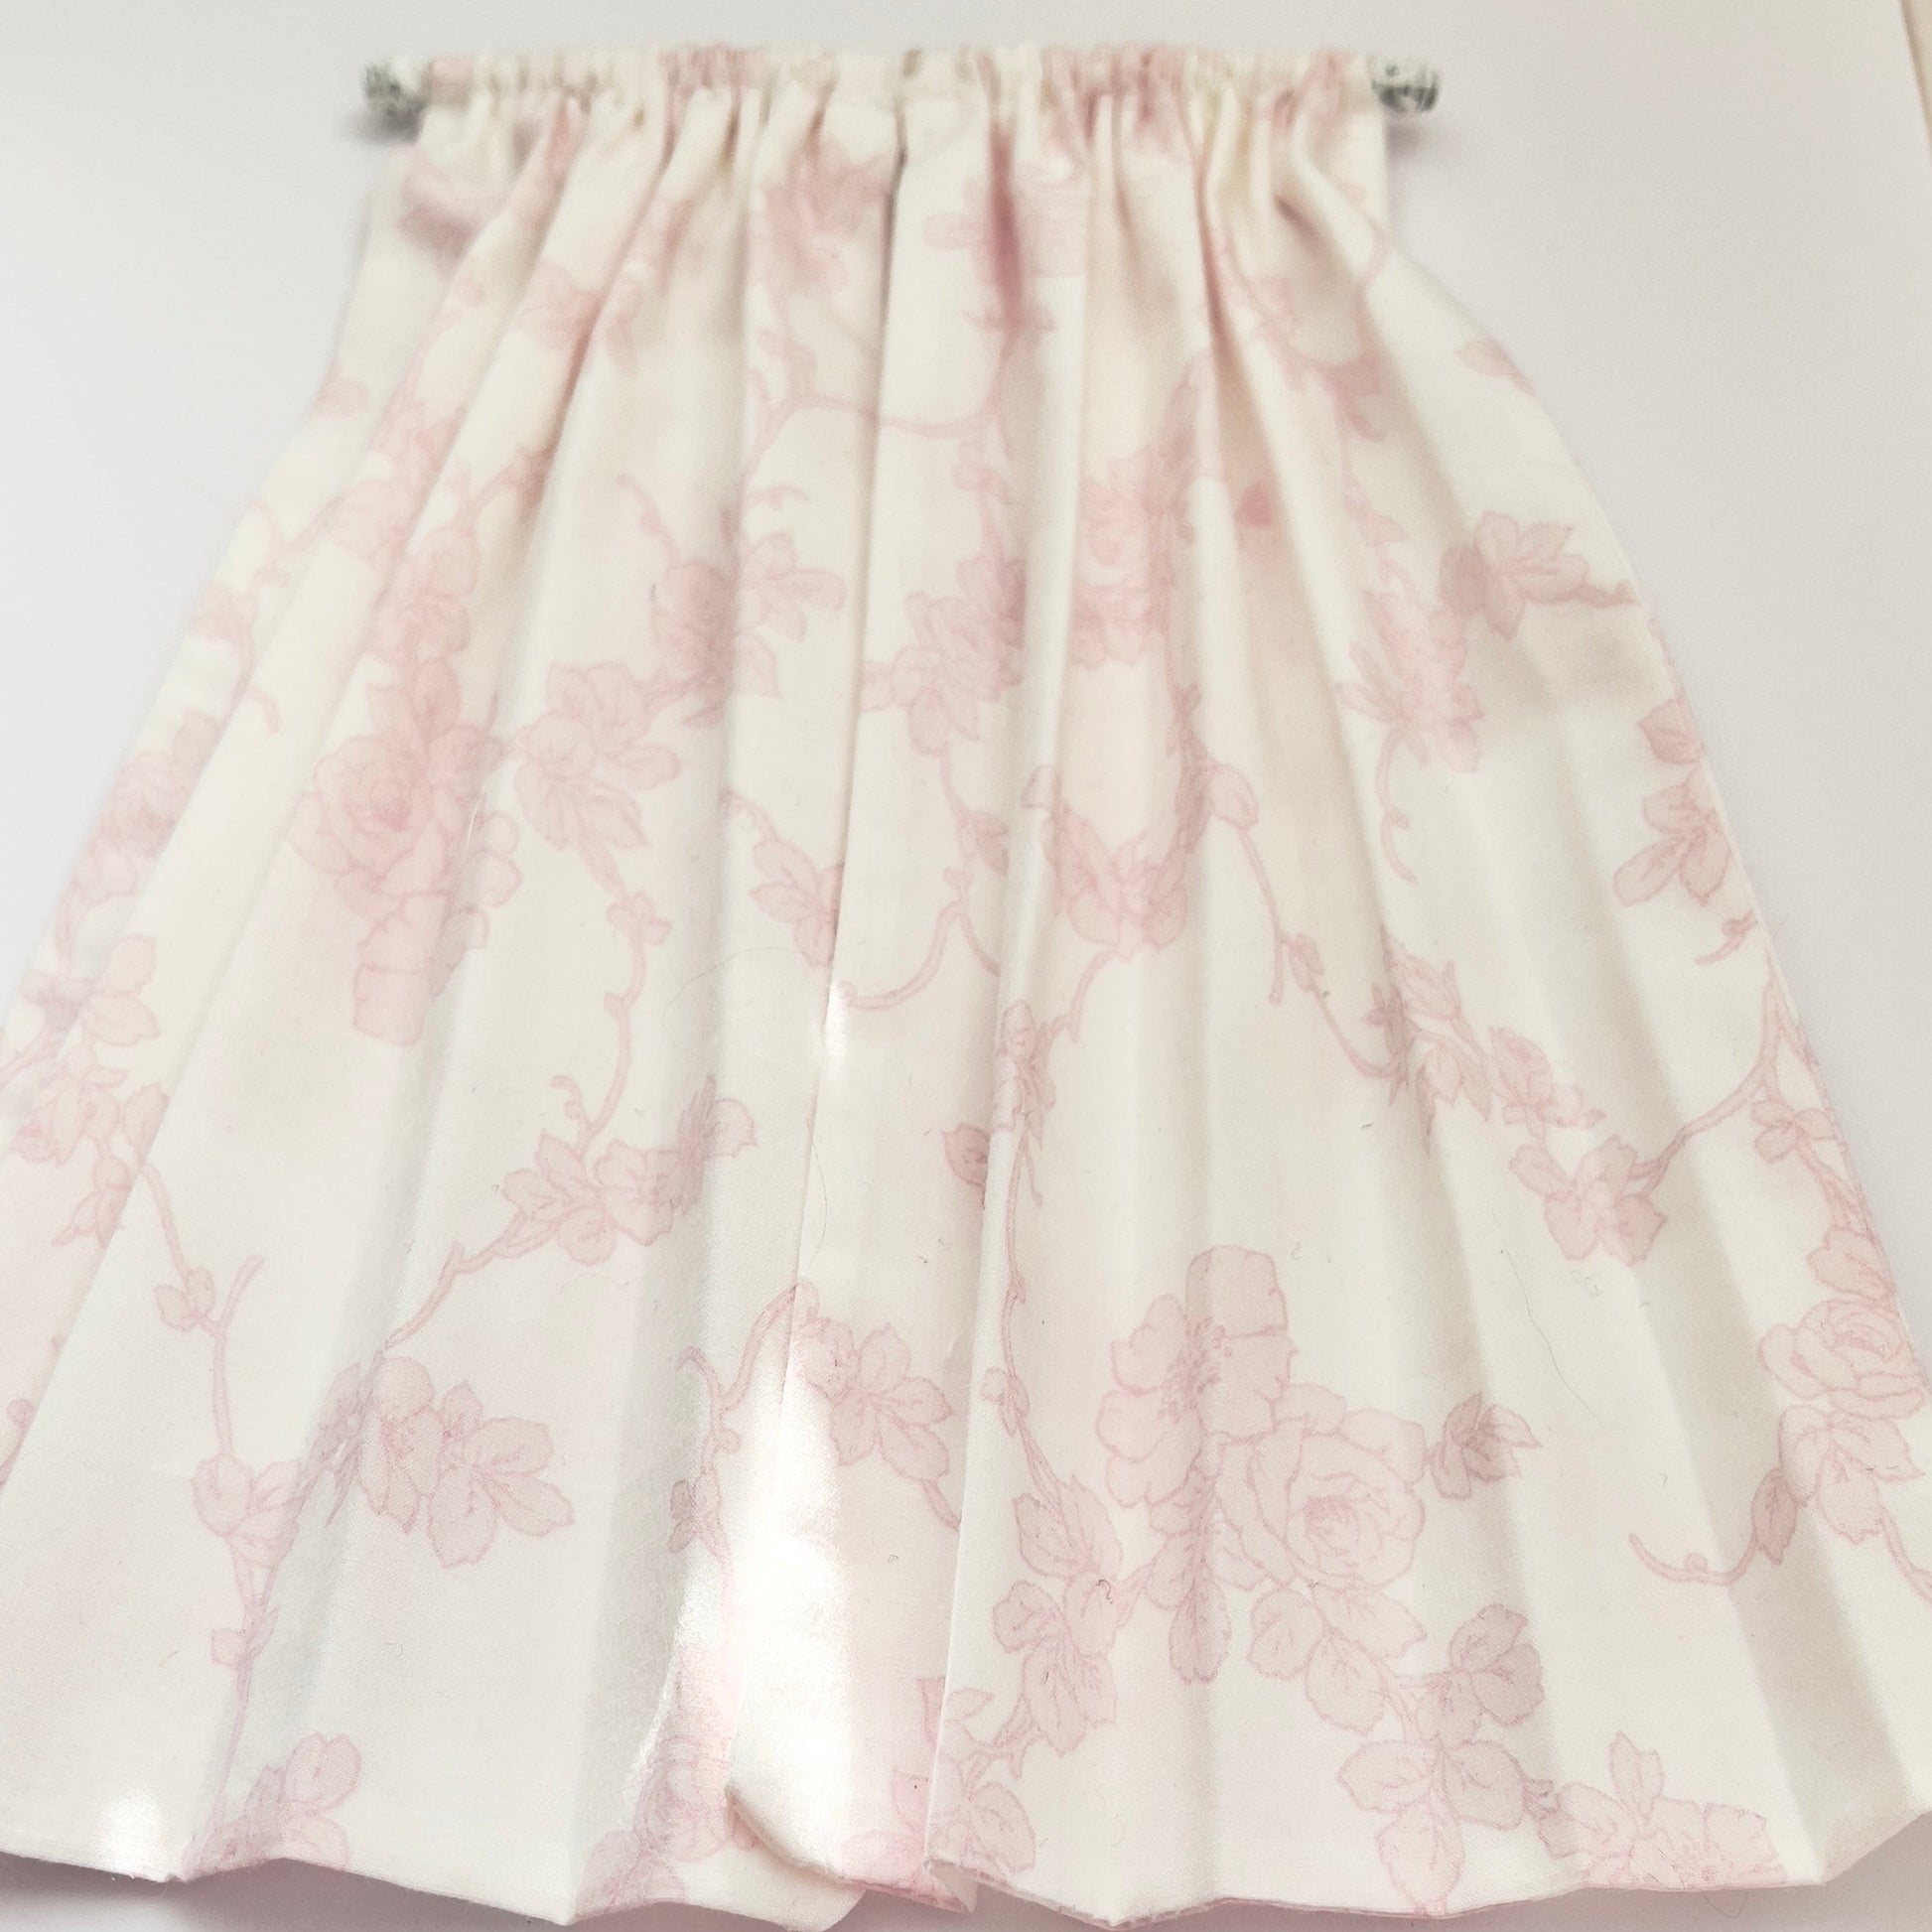 Chantallena Doll House Dollhouse Accessories 1 Curtain with rod CURTAINS- Faded Pink and White Floral Vines 2 Panel Cotton Curtains | Faded Floral Vine | Soft Furnishings